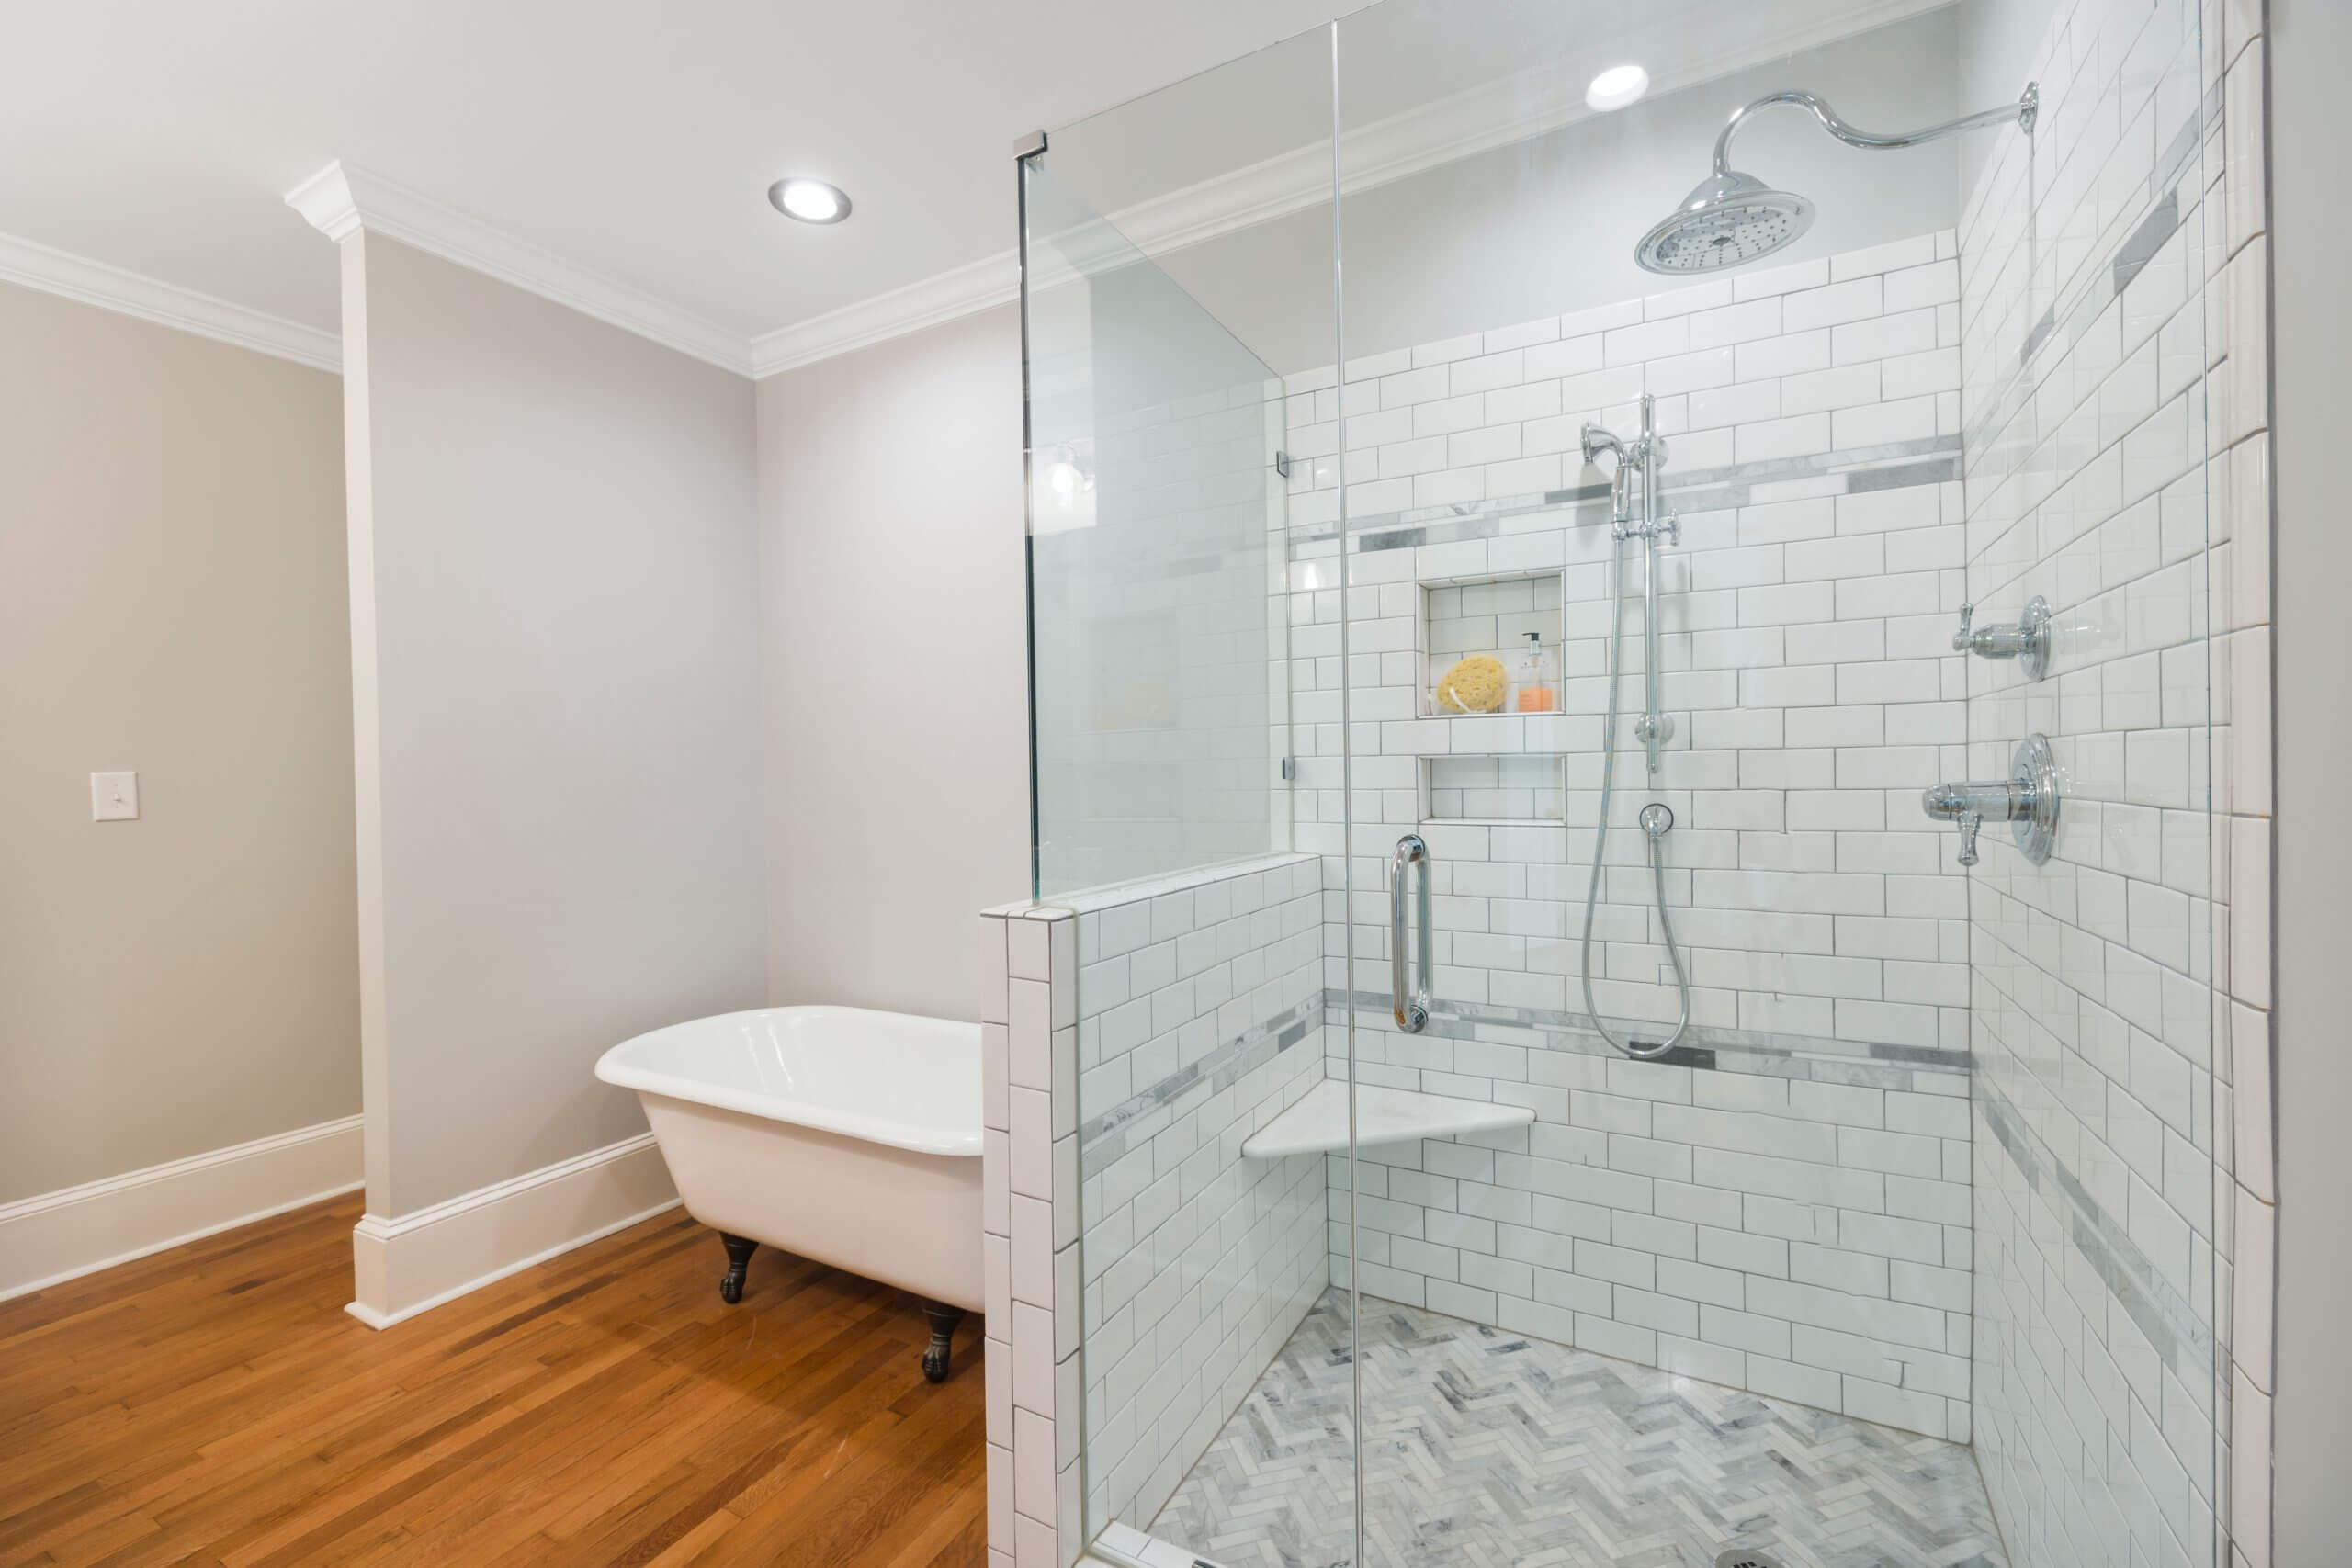 Checklist: What You Need To Tile Your Bathroom - Walls and Floors